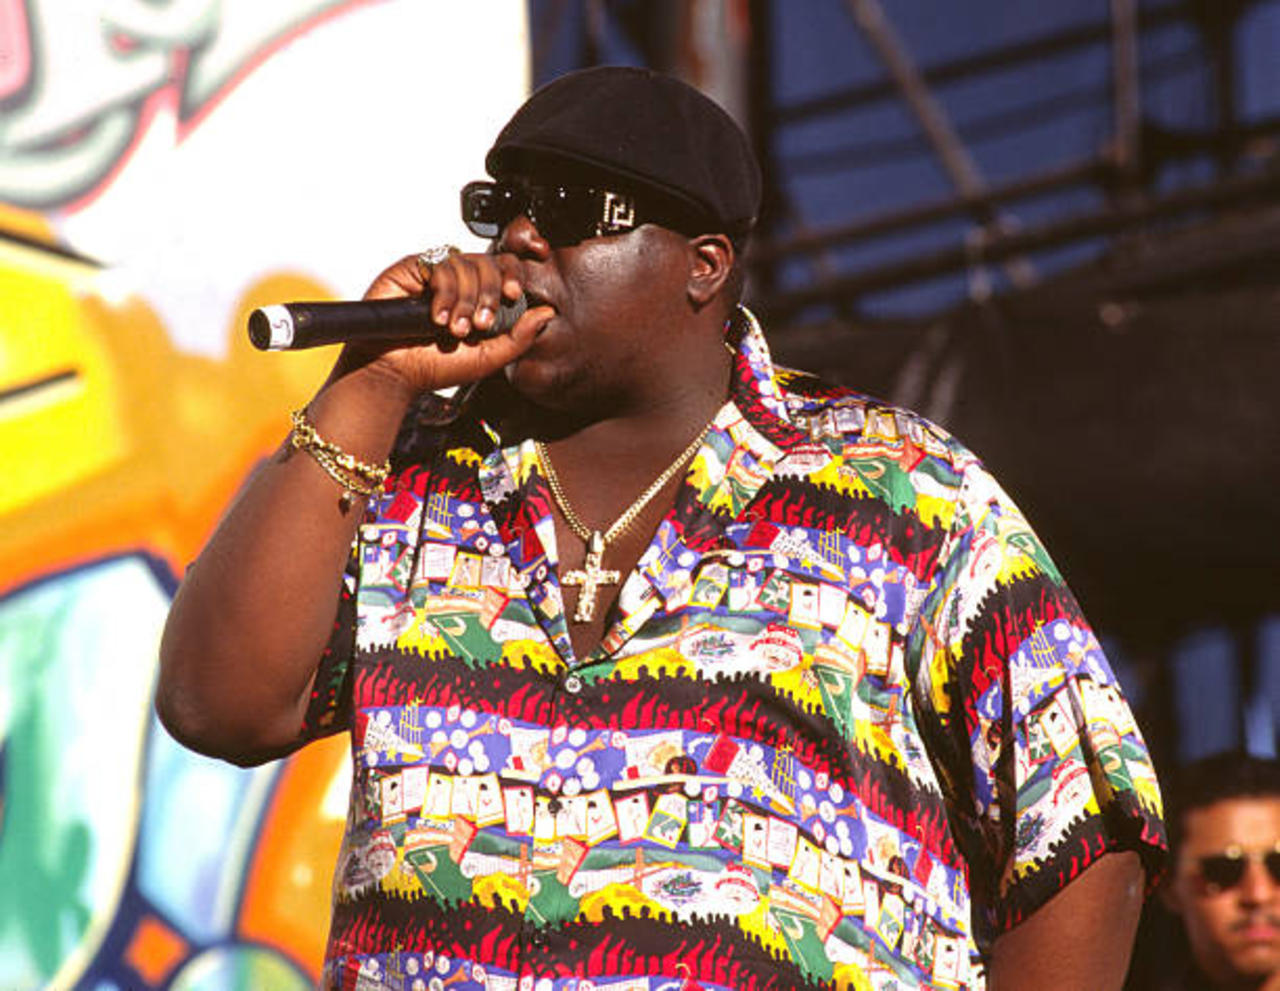 Remembering The Notorious B.I.G